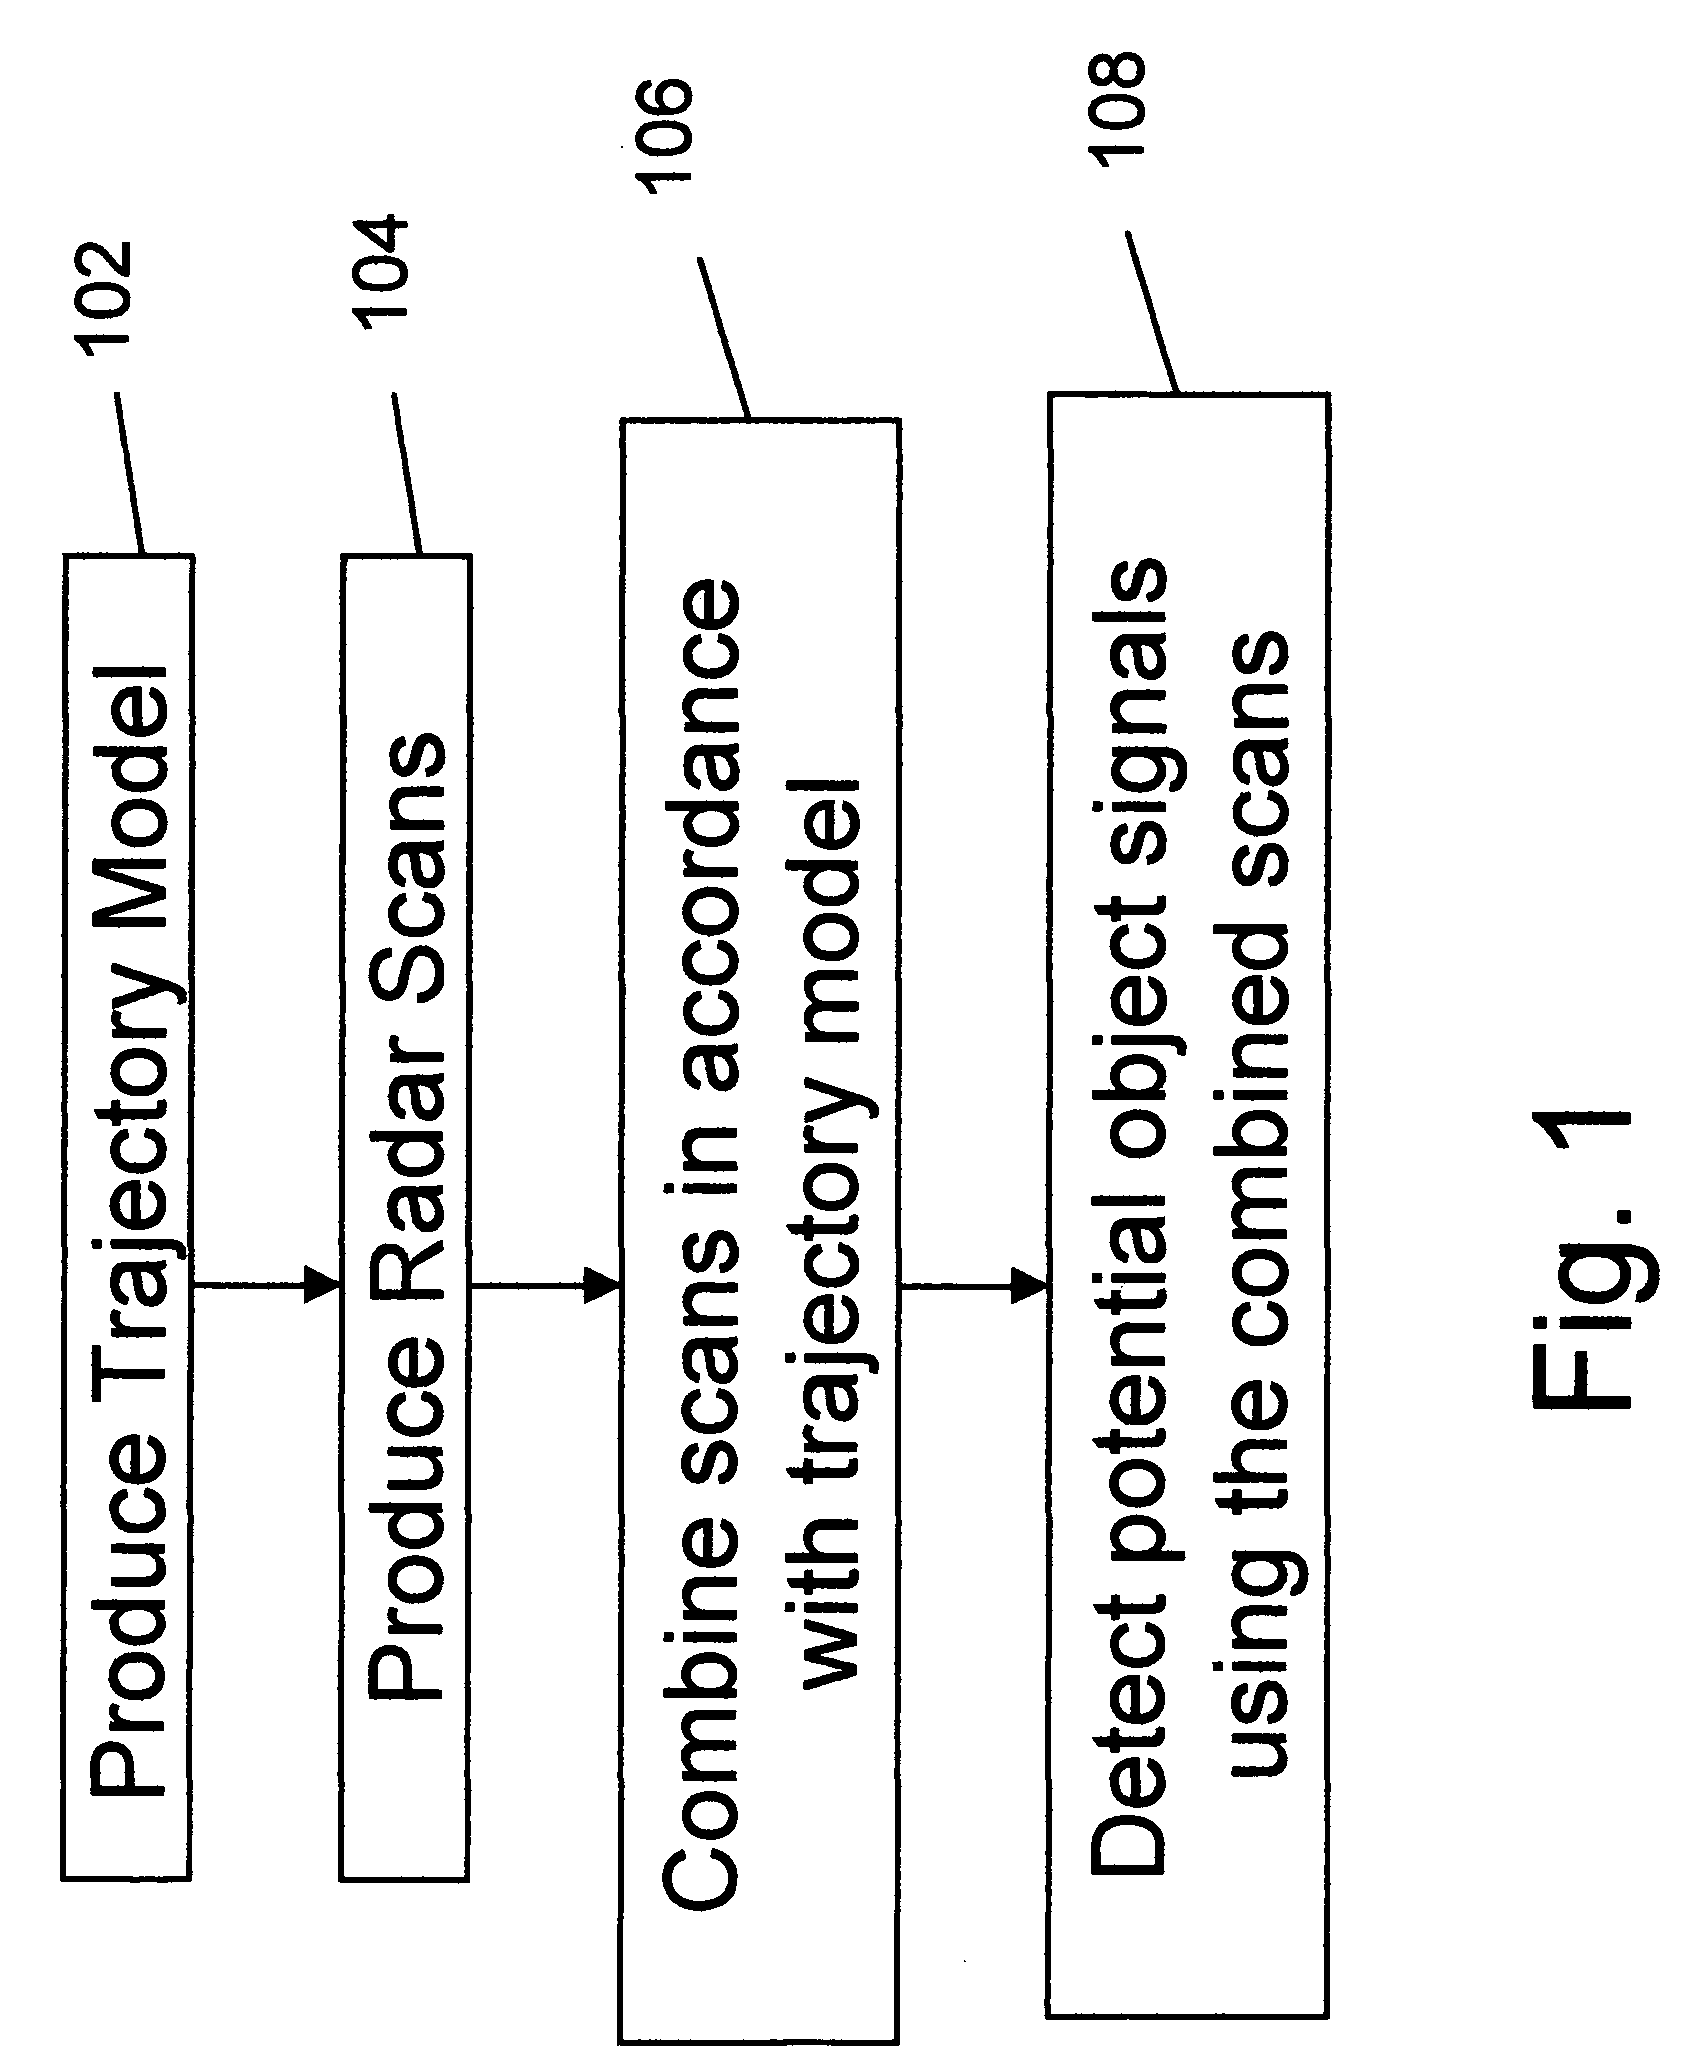 Apparatus and method for detecting moving objects